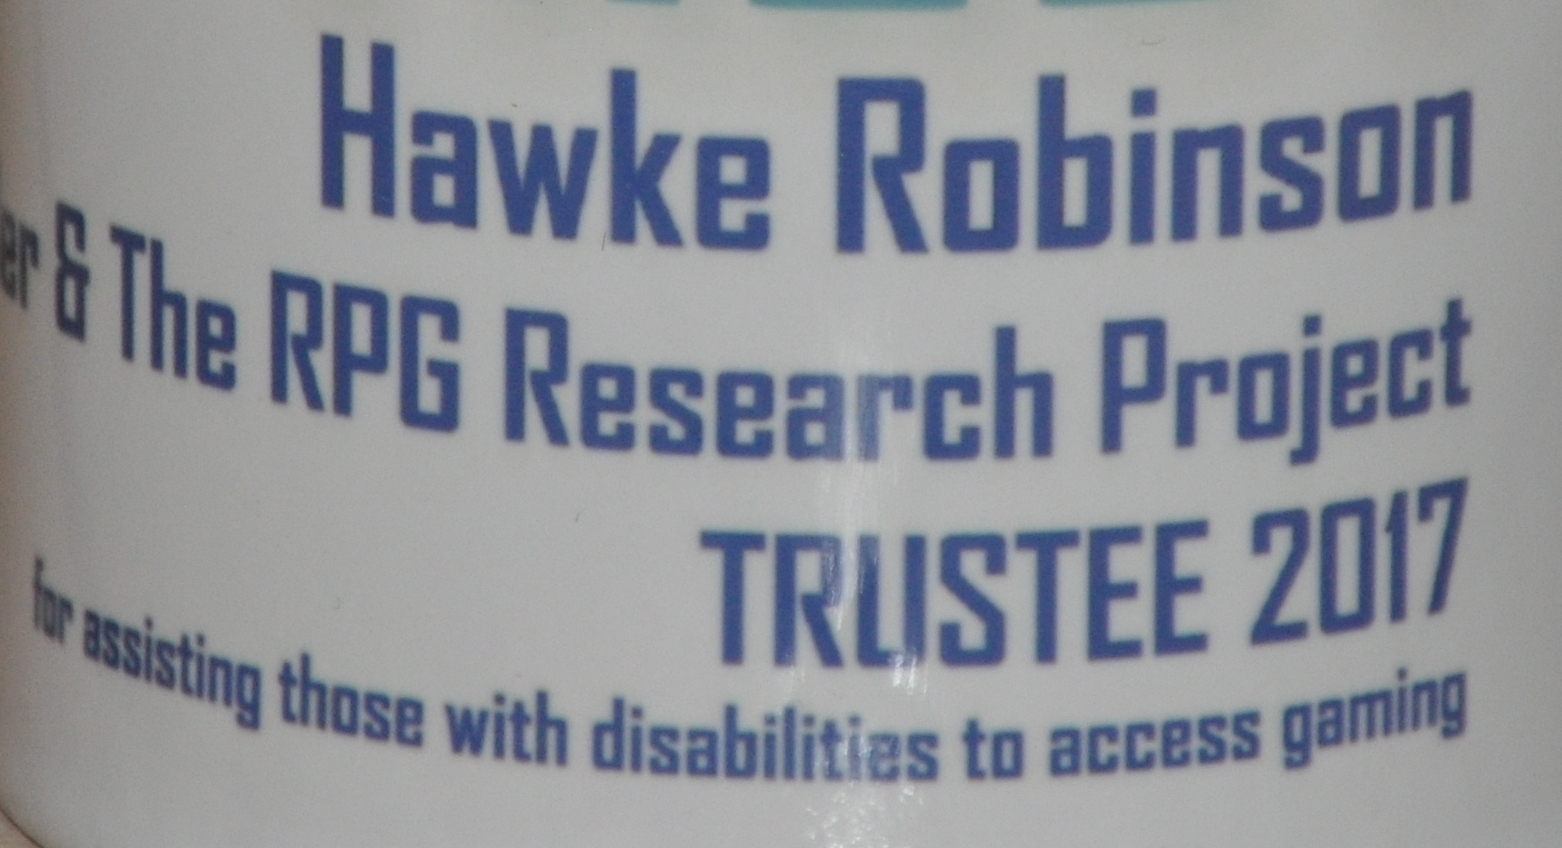 The RPG Brain Trust 2017 Trustee - Hawke Robinson of RPG Research Project and The RPG Trailer